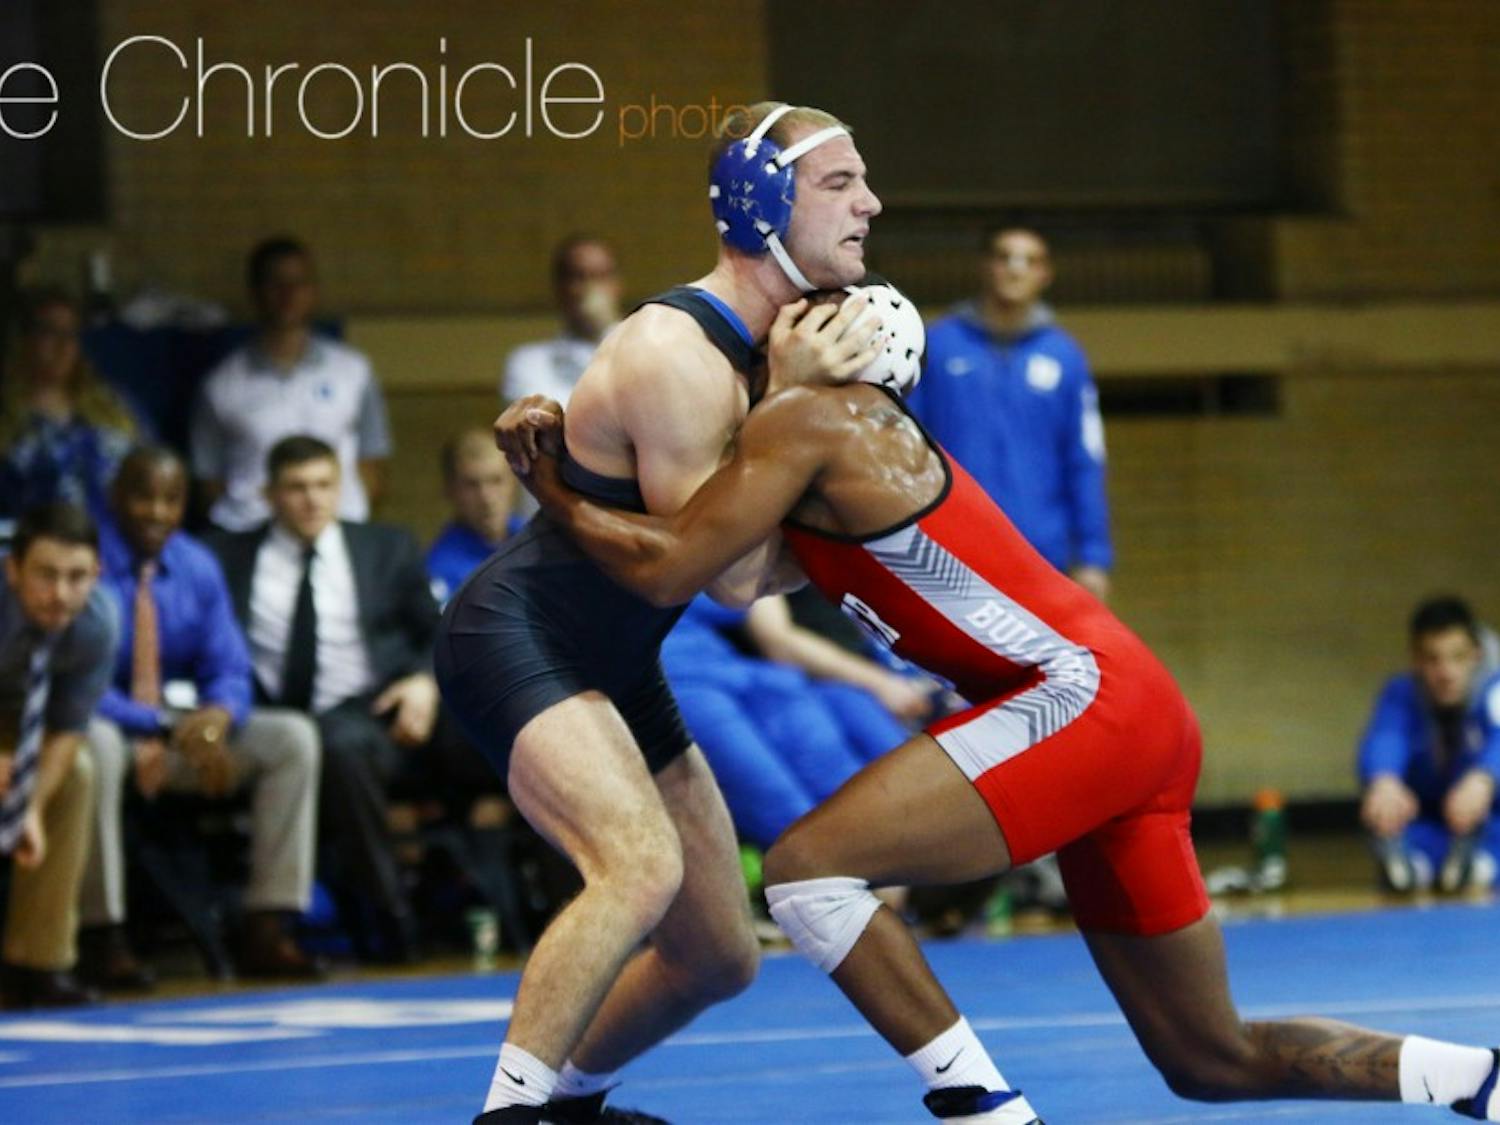 The Blue Devils will have several wrestlers competing in new weight classes to start the season.&nbsp;